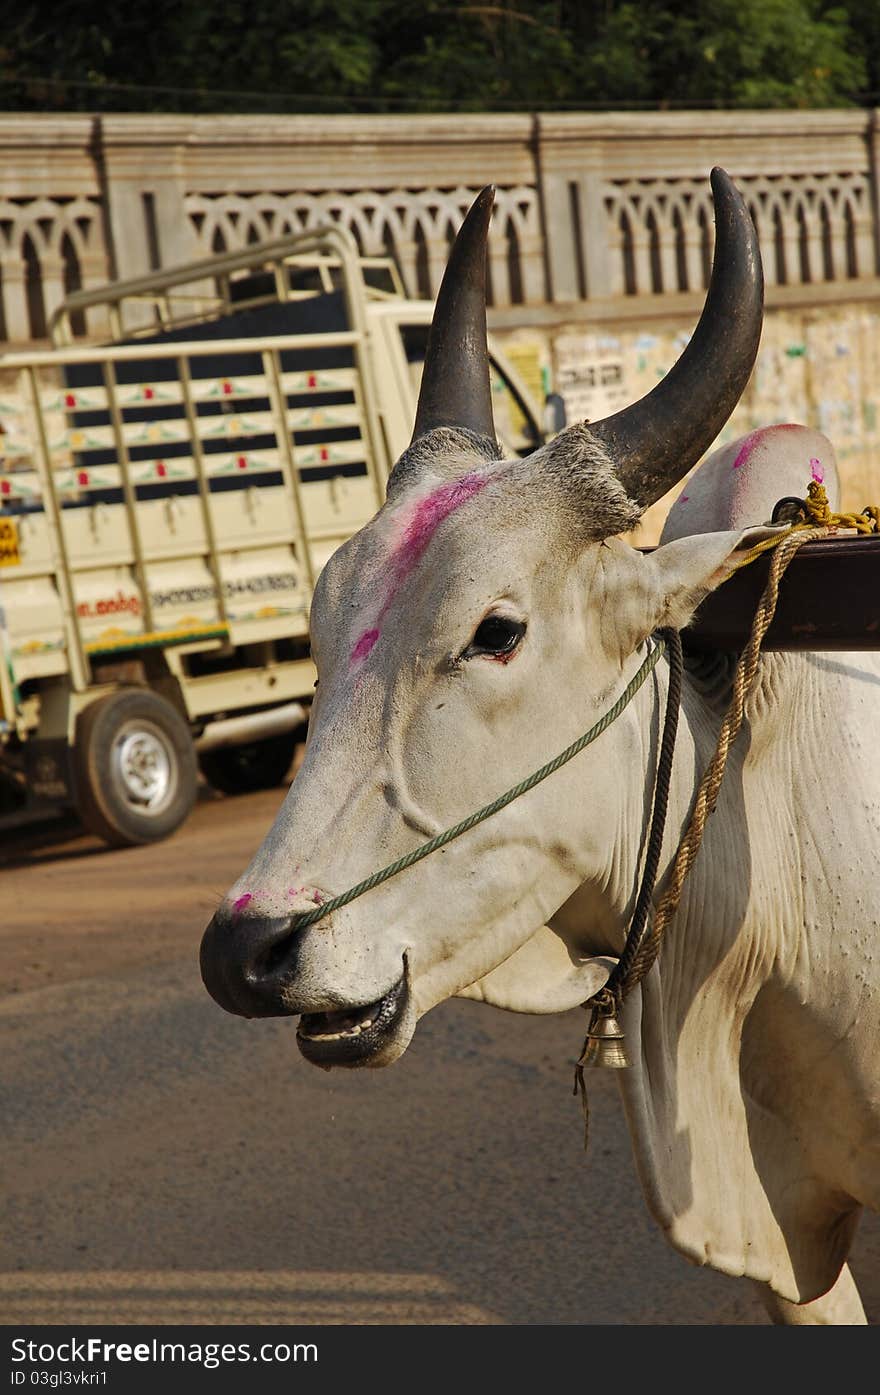 The Indian holy cow, or in this case a bullock is nicely decorated as a sign of respect from the owner